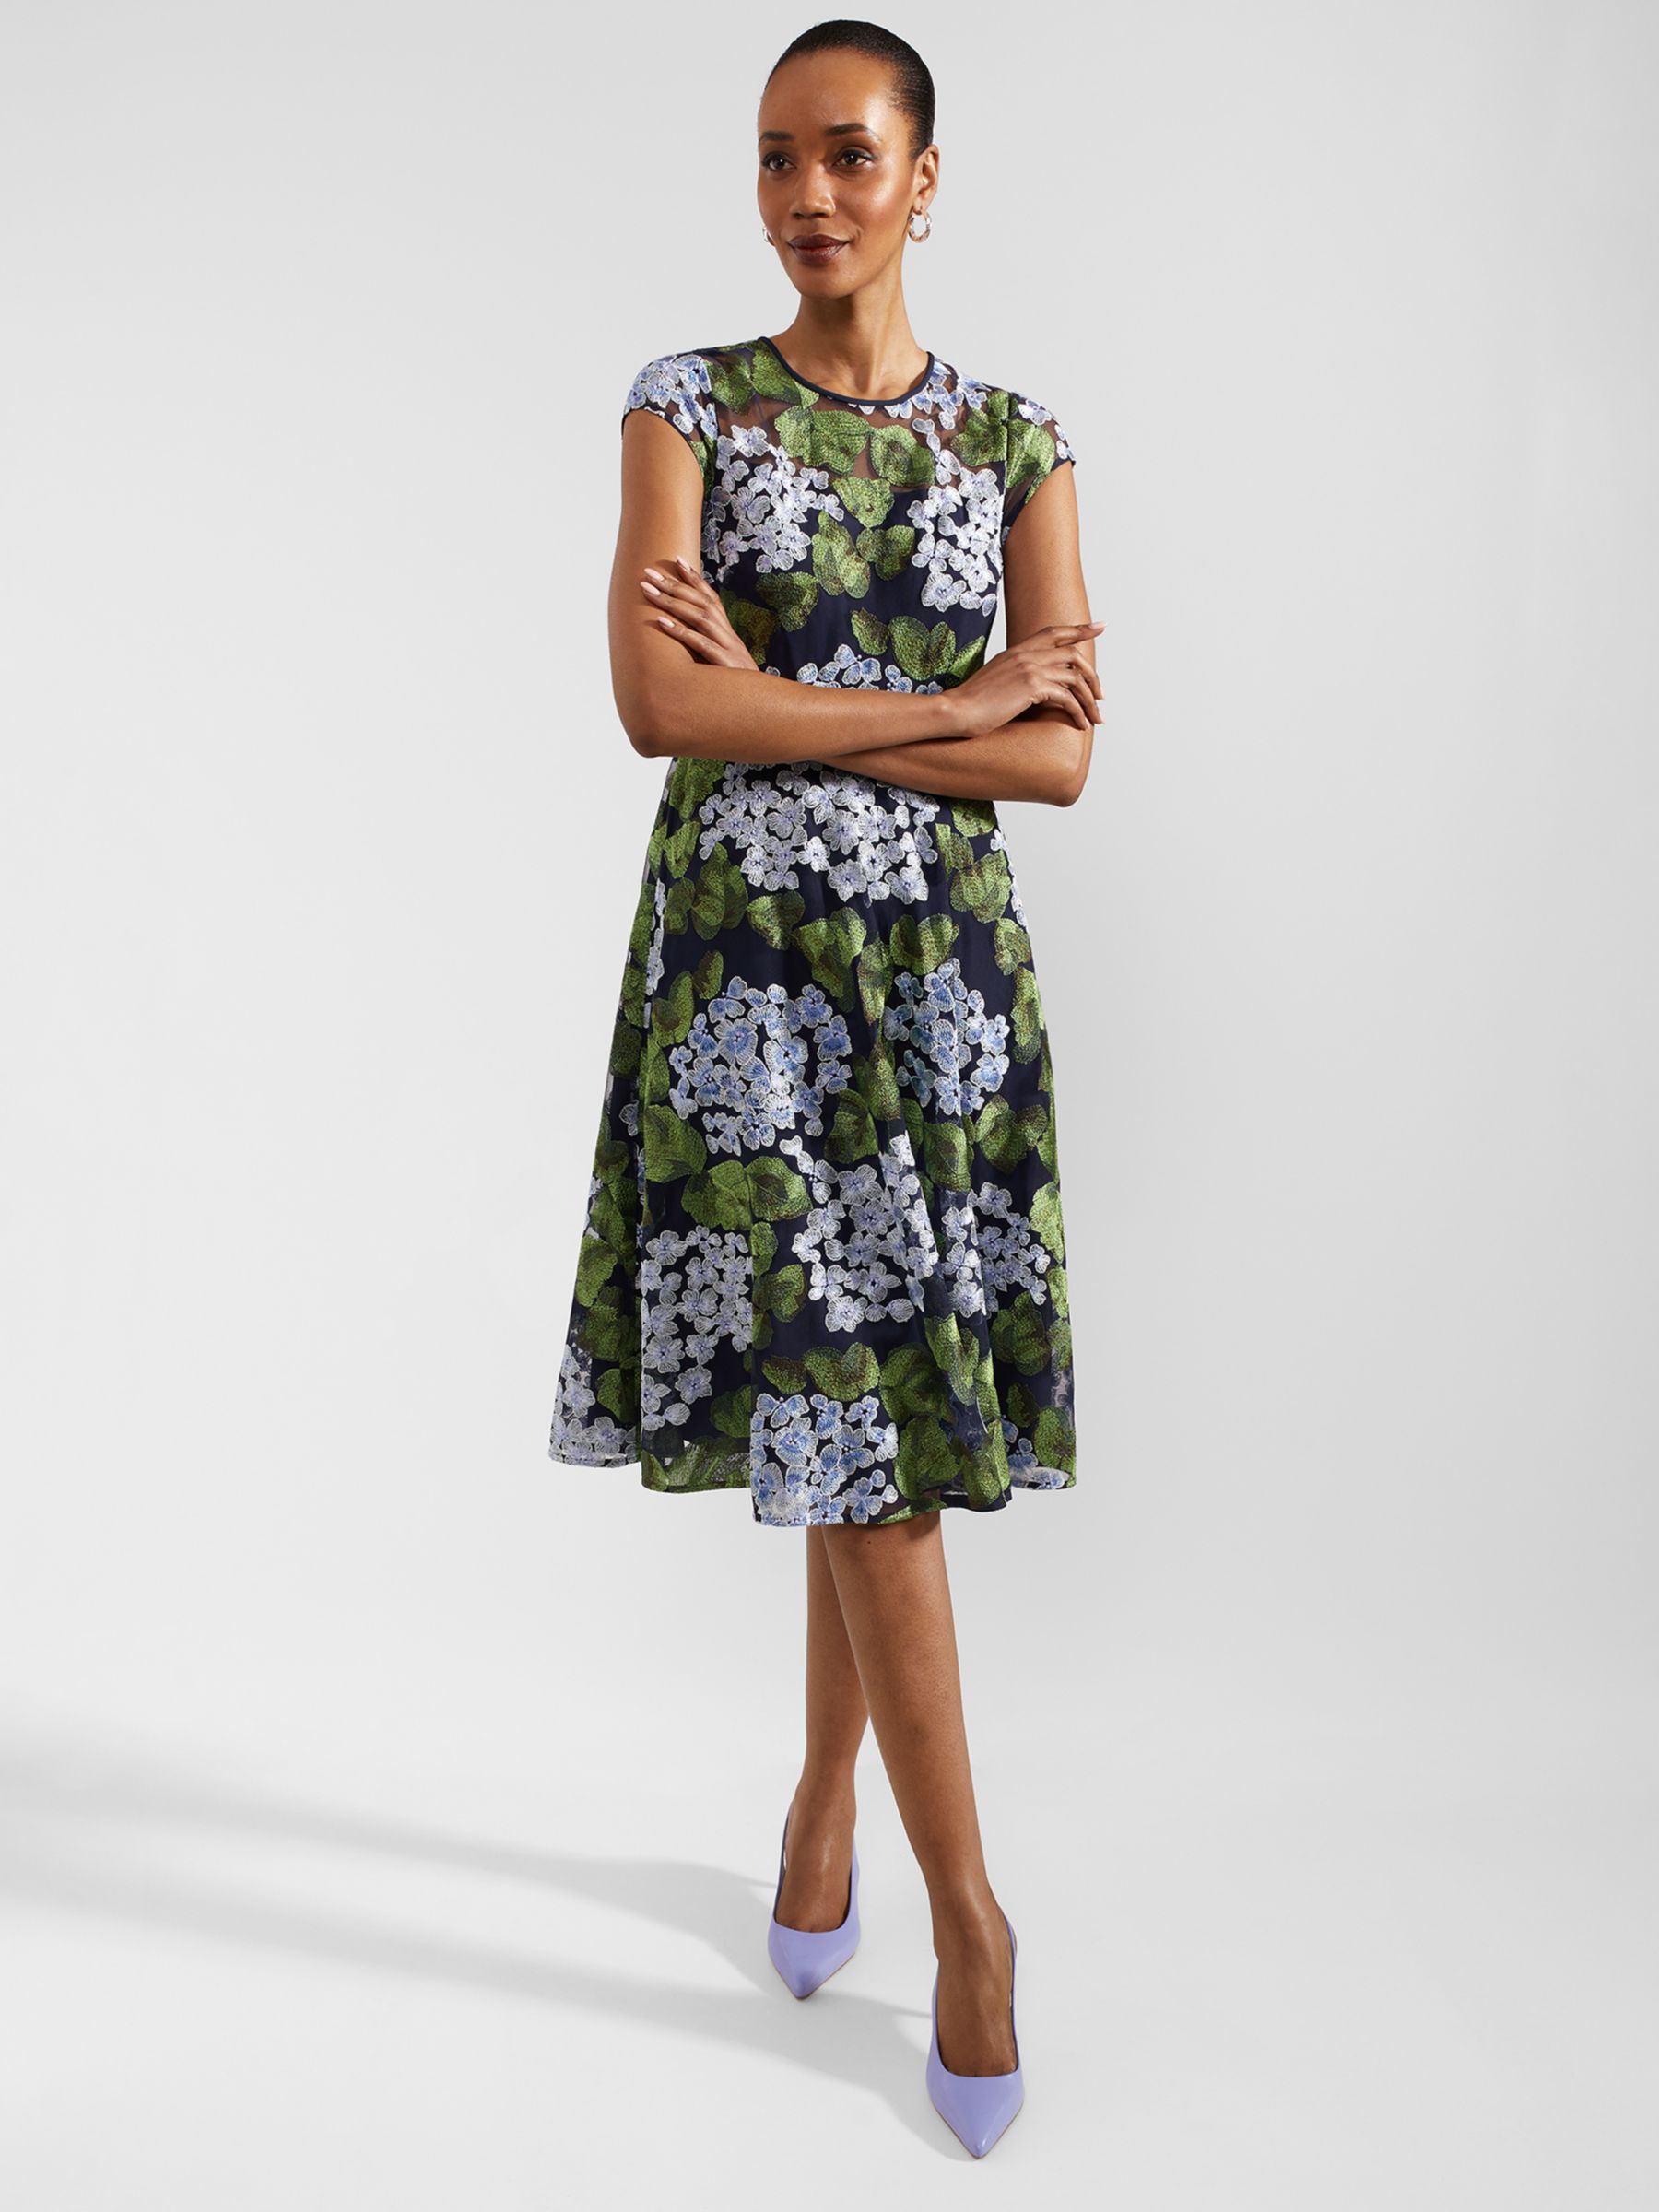 Hobbs Tia Floral Embroidery Dress, Navy/Multi, 10